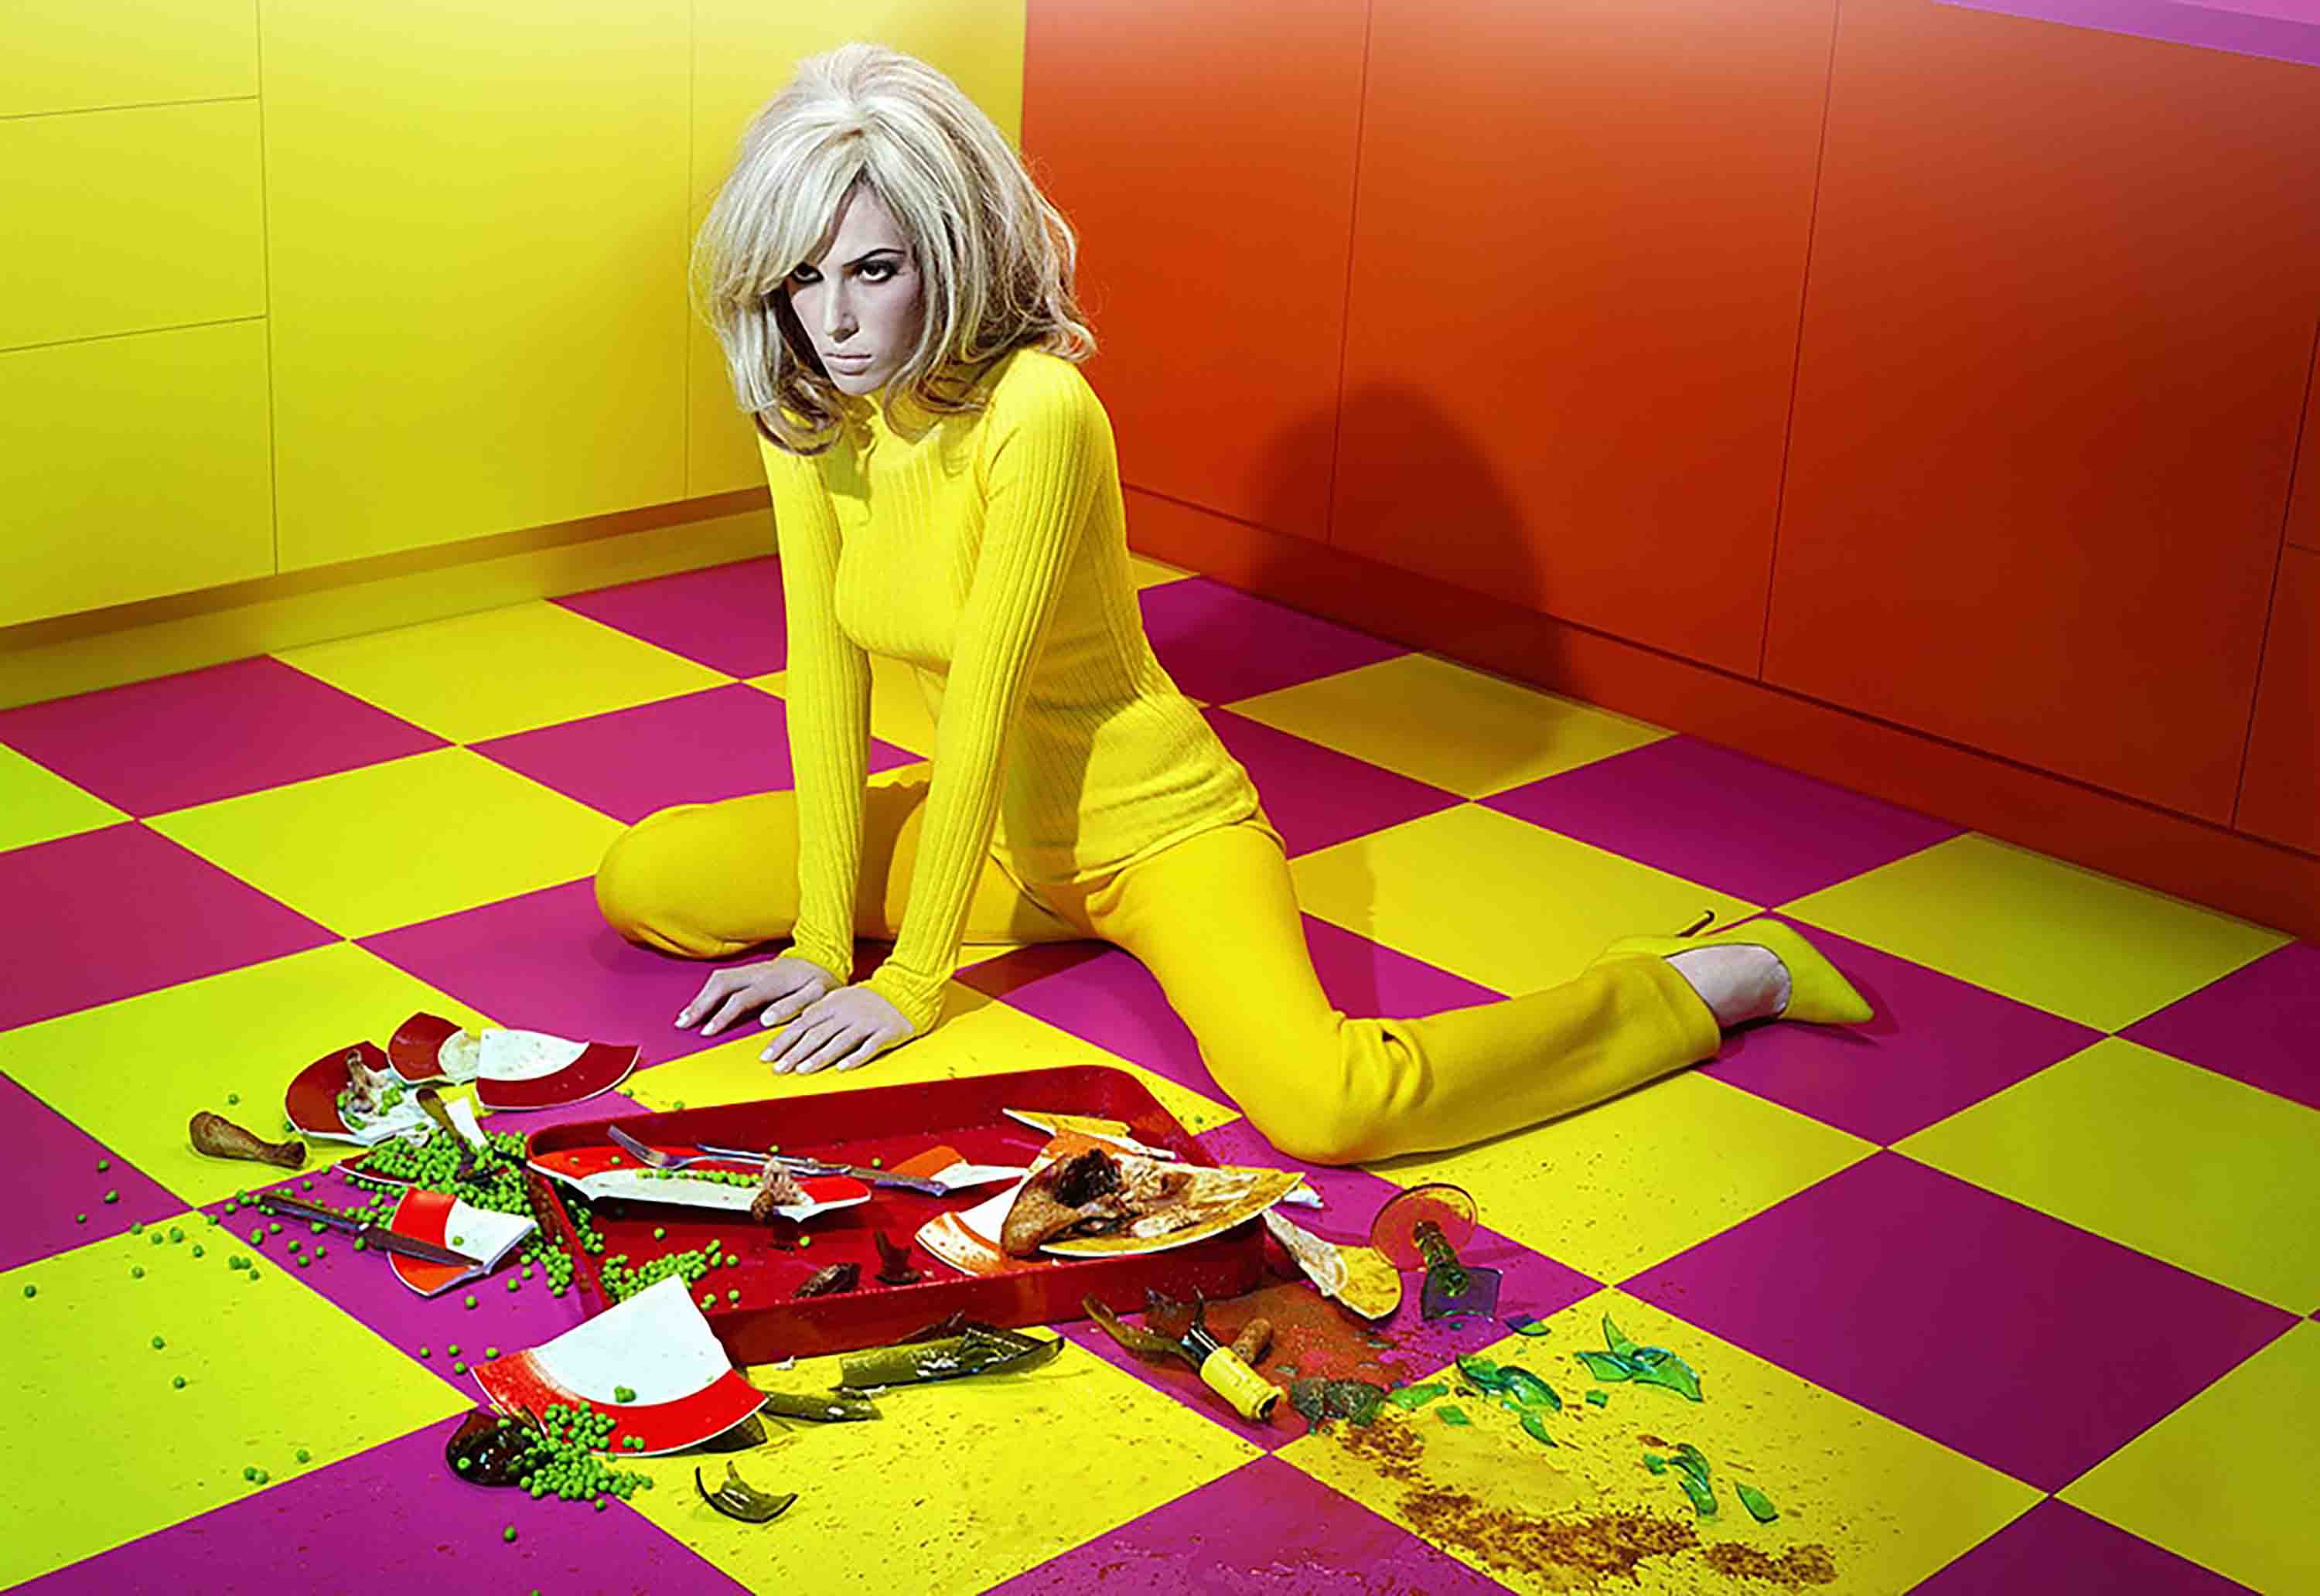 Miles Aldridge, 'I Only Want You To Love Me #1, 2011'